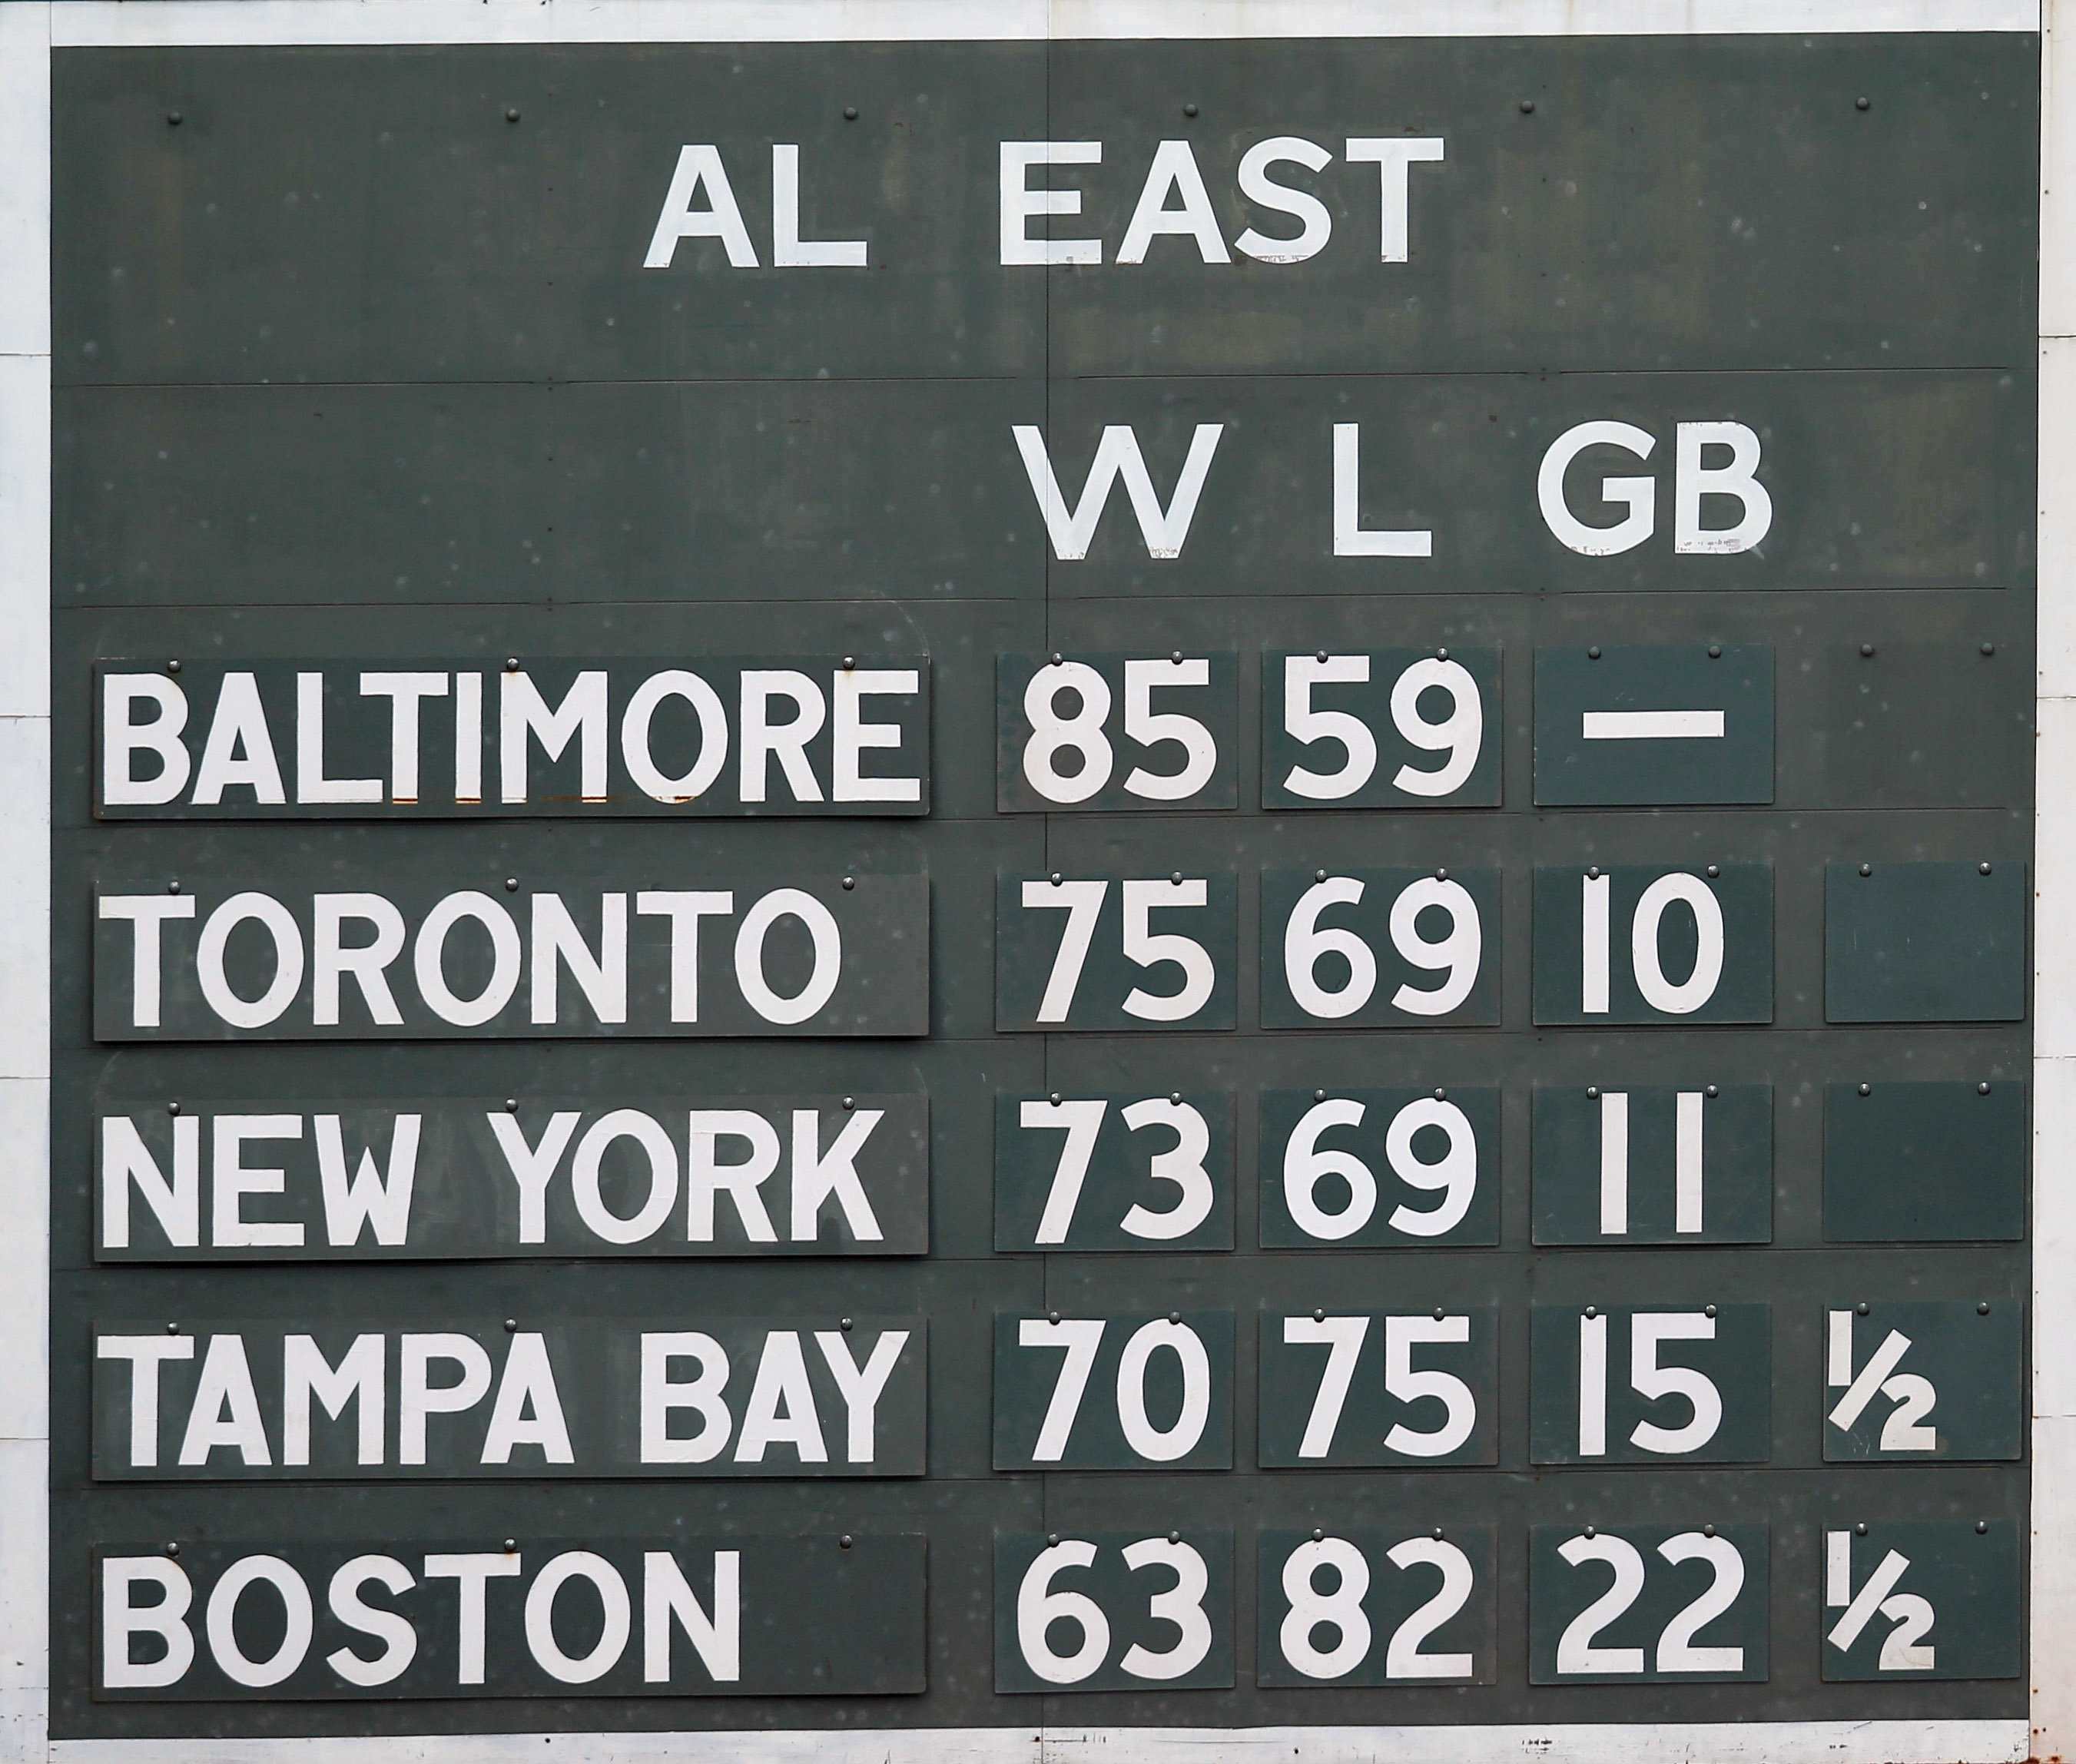 Sep 10, 2014; Boston, MA, USA; The standings listed on the wall of the green monster show the Boston Red Sox in last place in the American League East during the seventh inning against the Baltimore Orioles at Fenway Park. Mandatory Credit: Greg M. Cooper-USA TODAY Sports